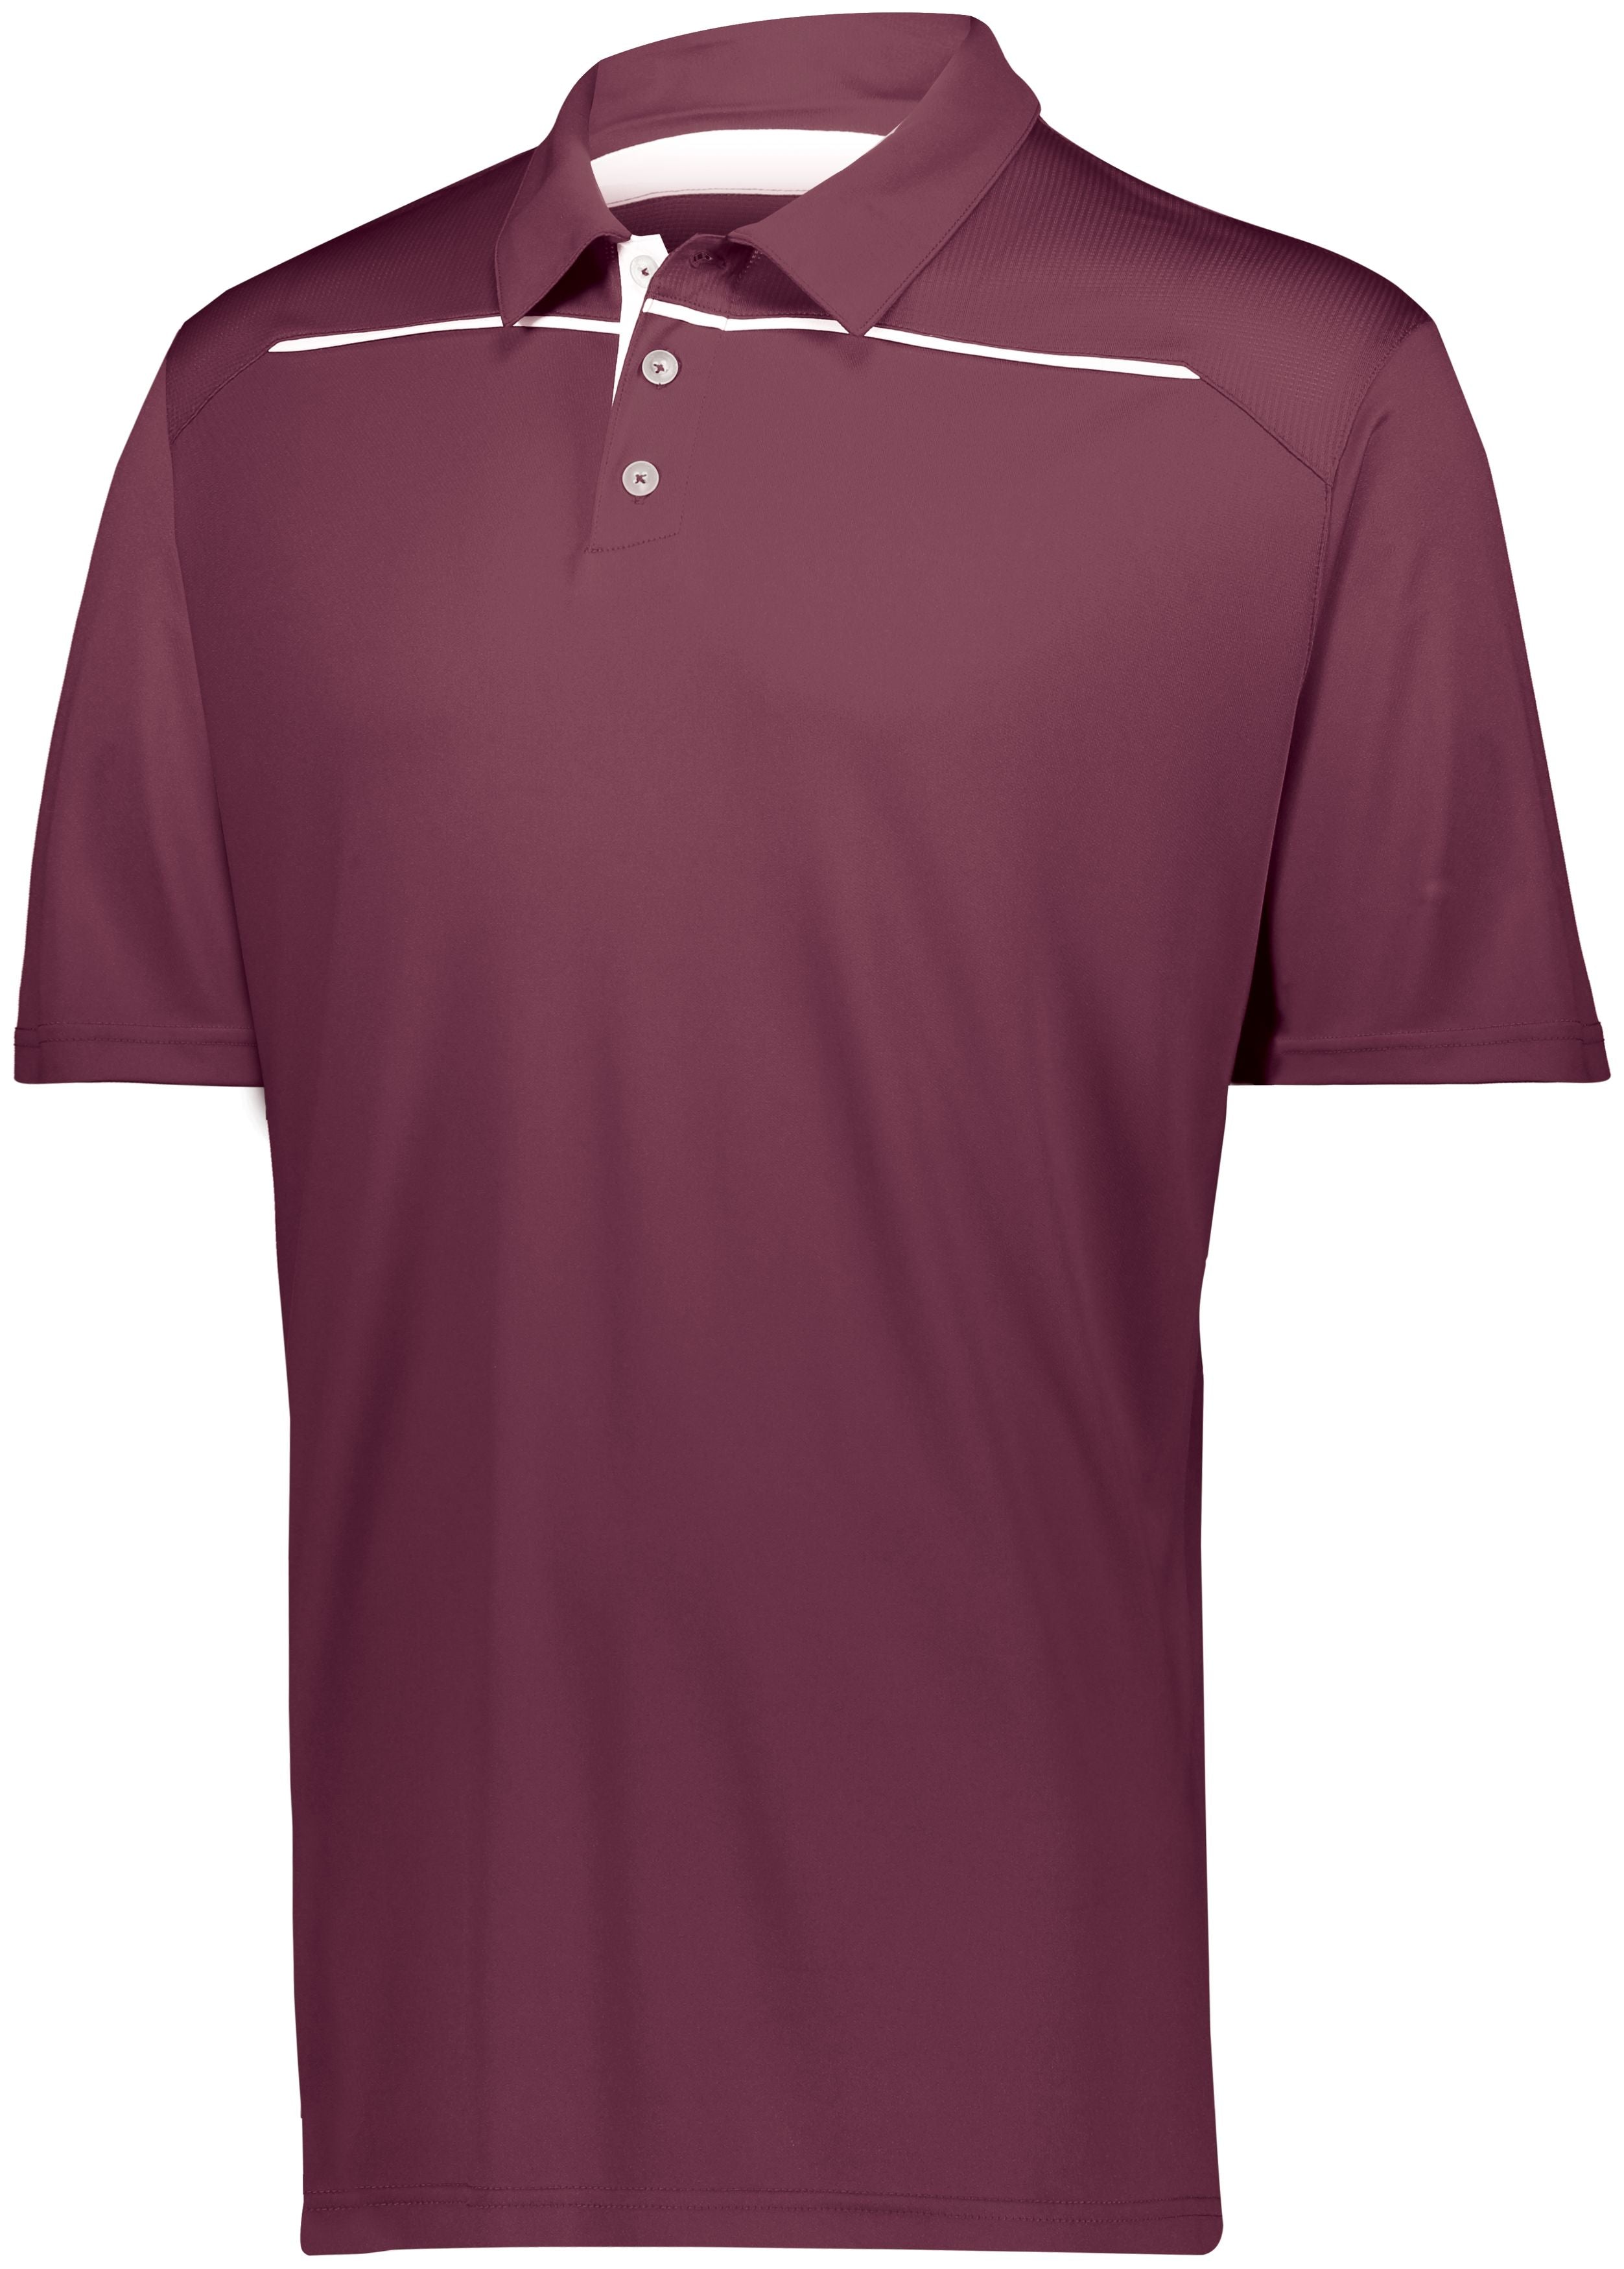 Holloway Defer Polo in Maroon/White  -Part of the Adult, Adult-Polos, Polos, Holloway, Shirts product lines at KanaleyCreations.com